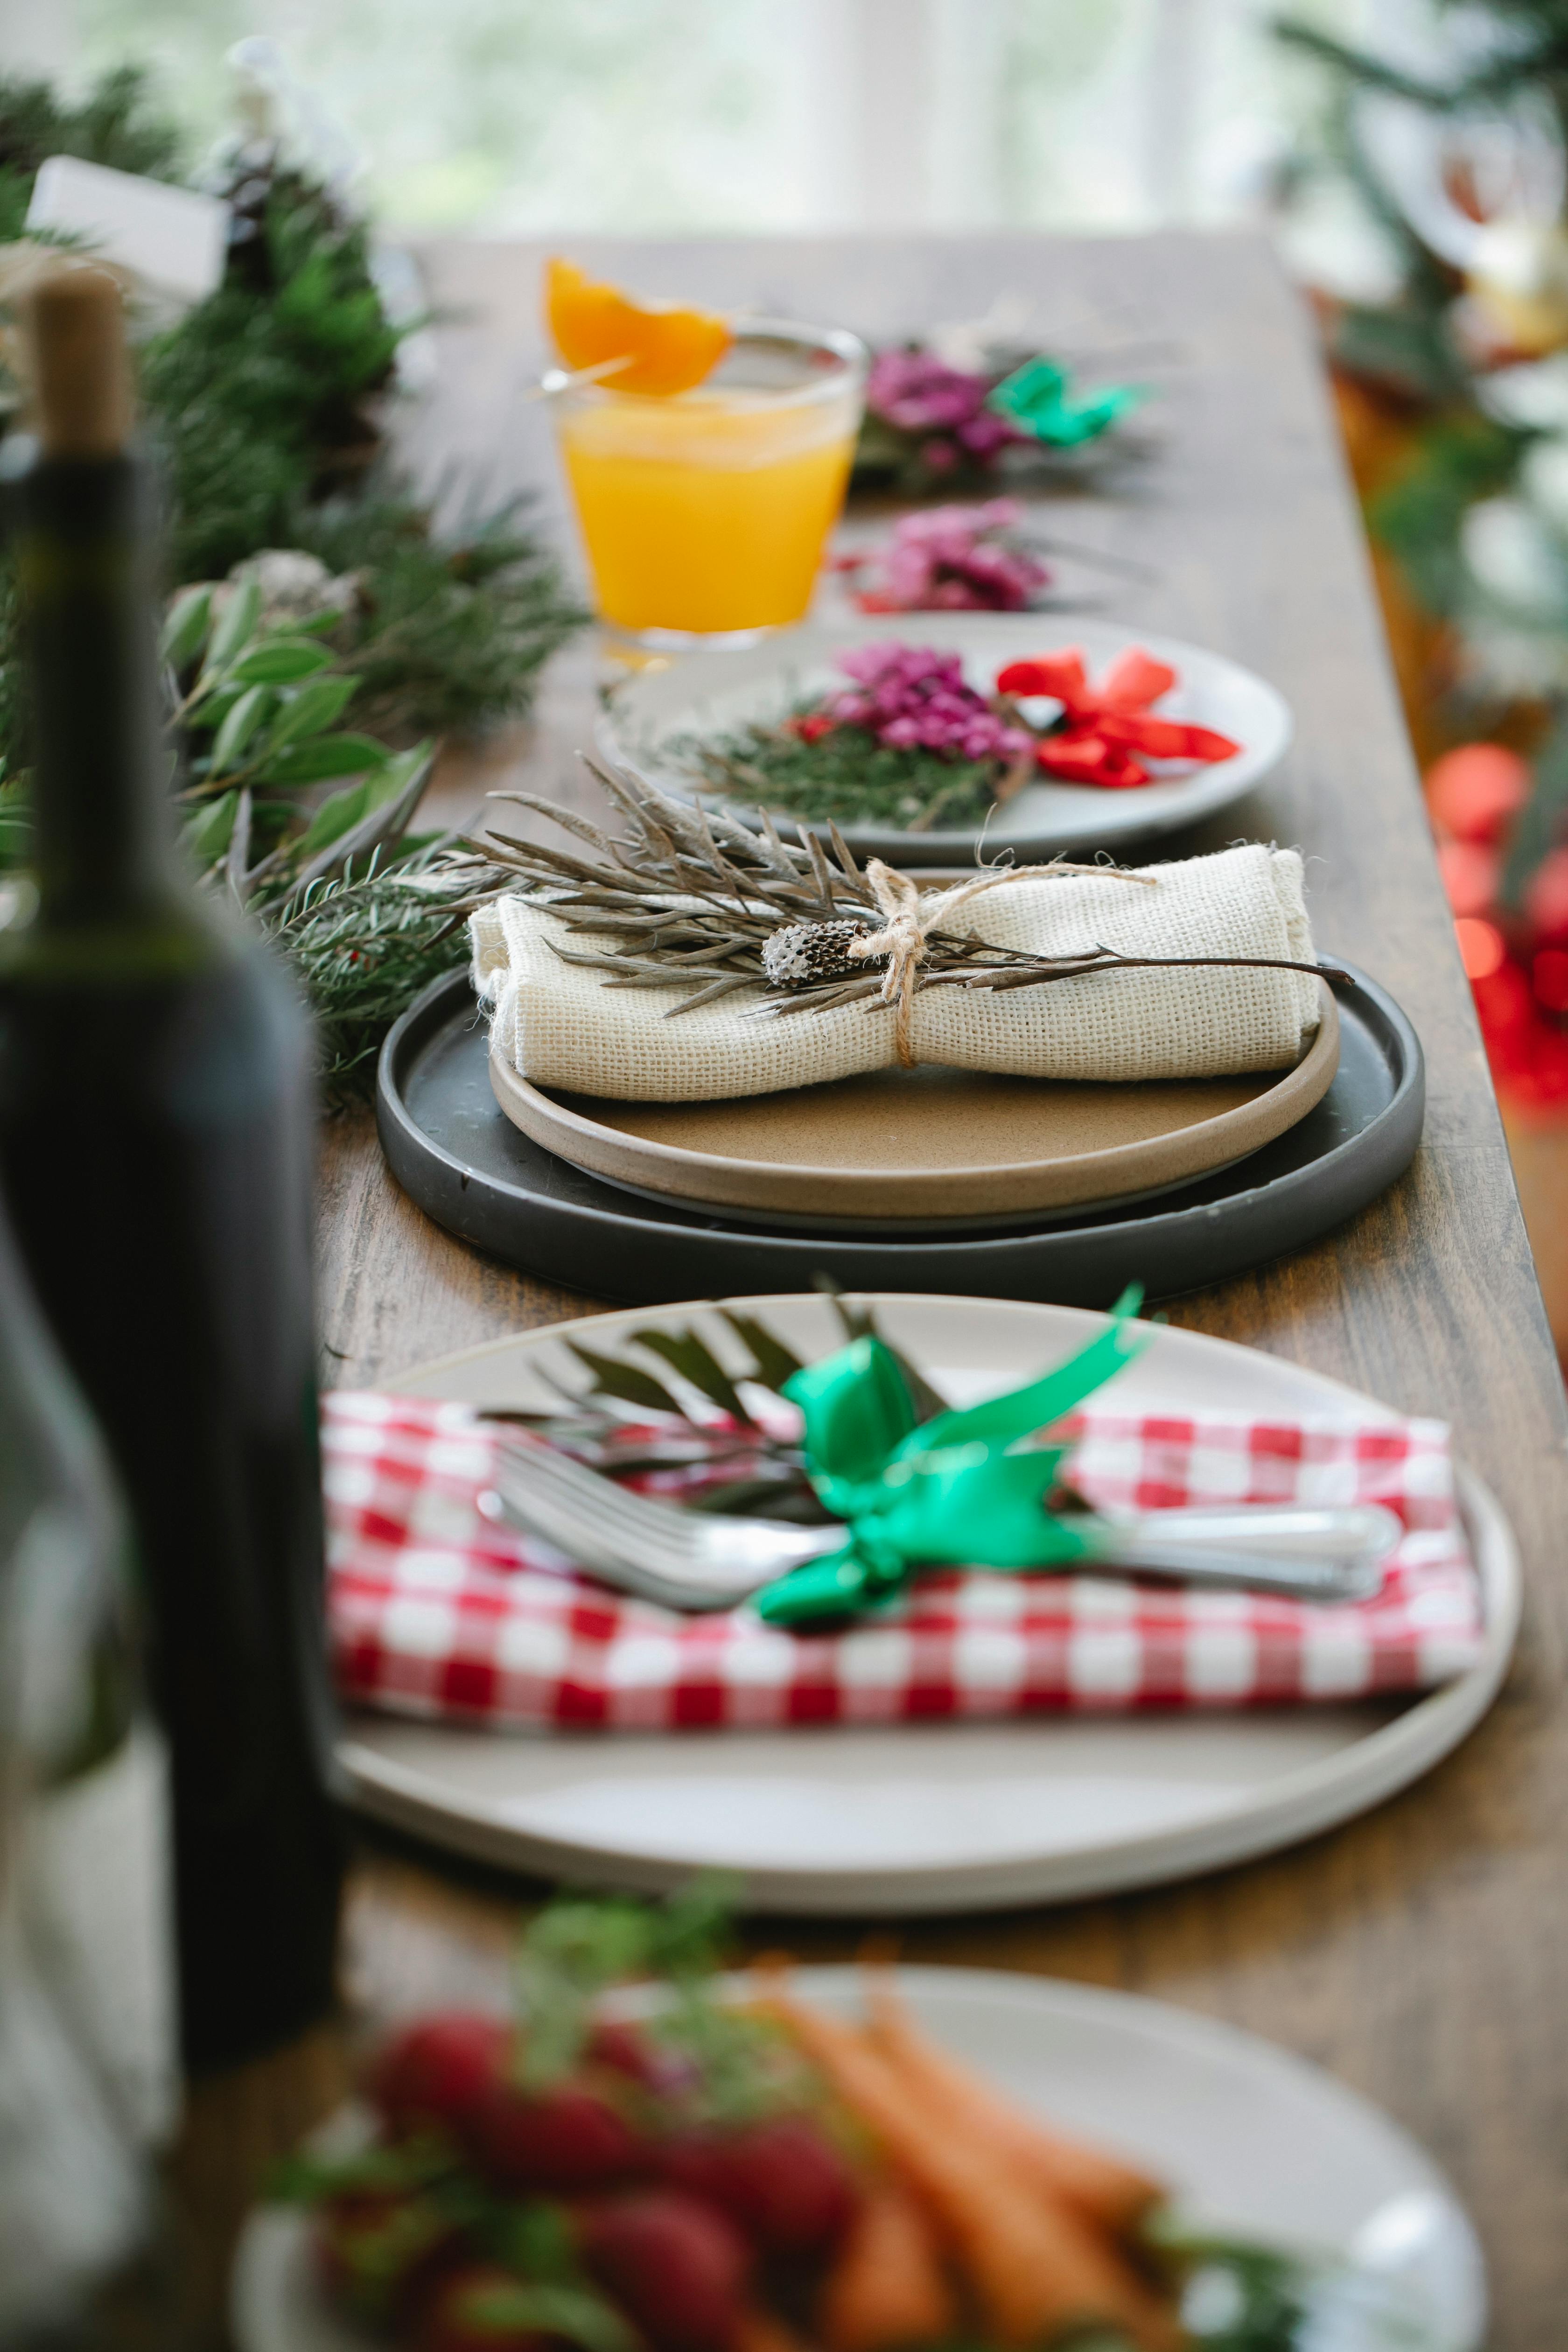 A laid-out table | Source: Pexels